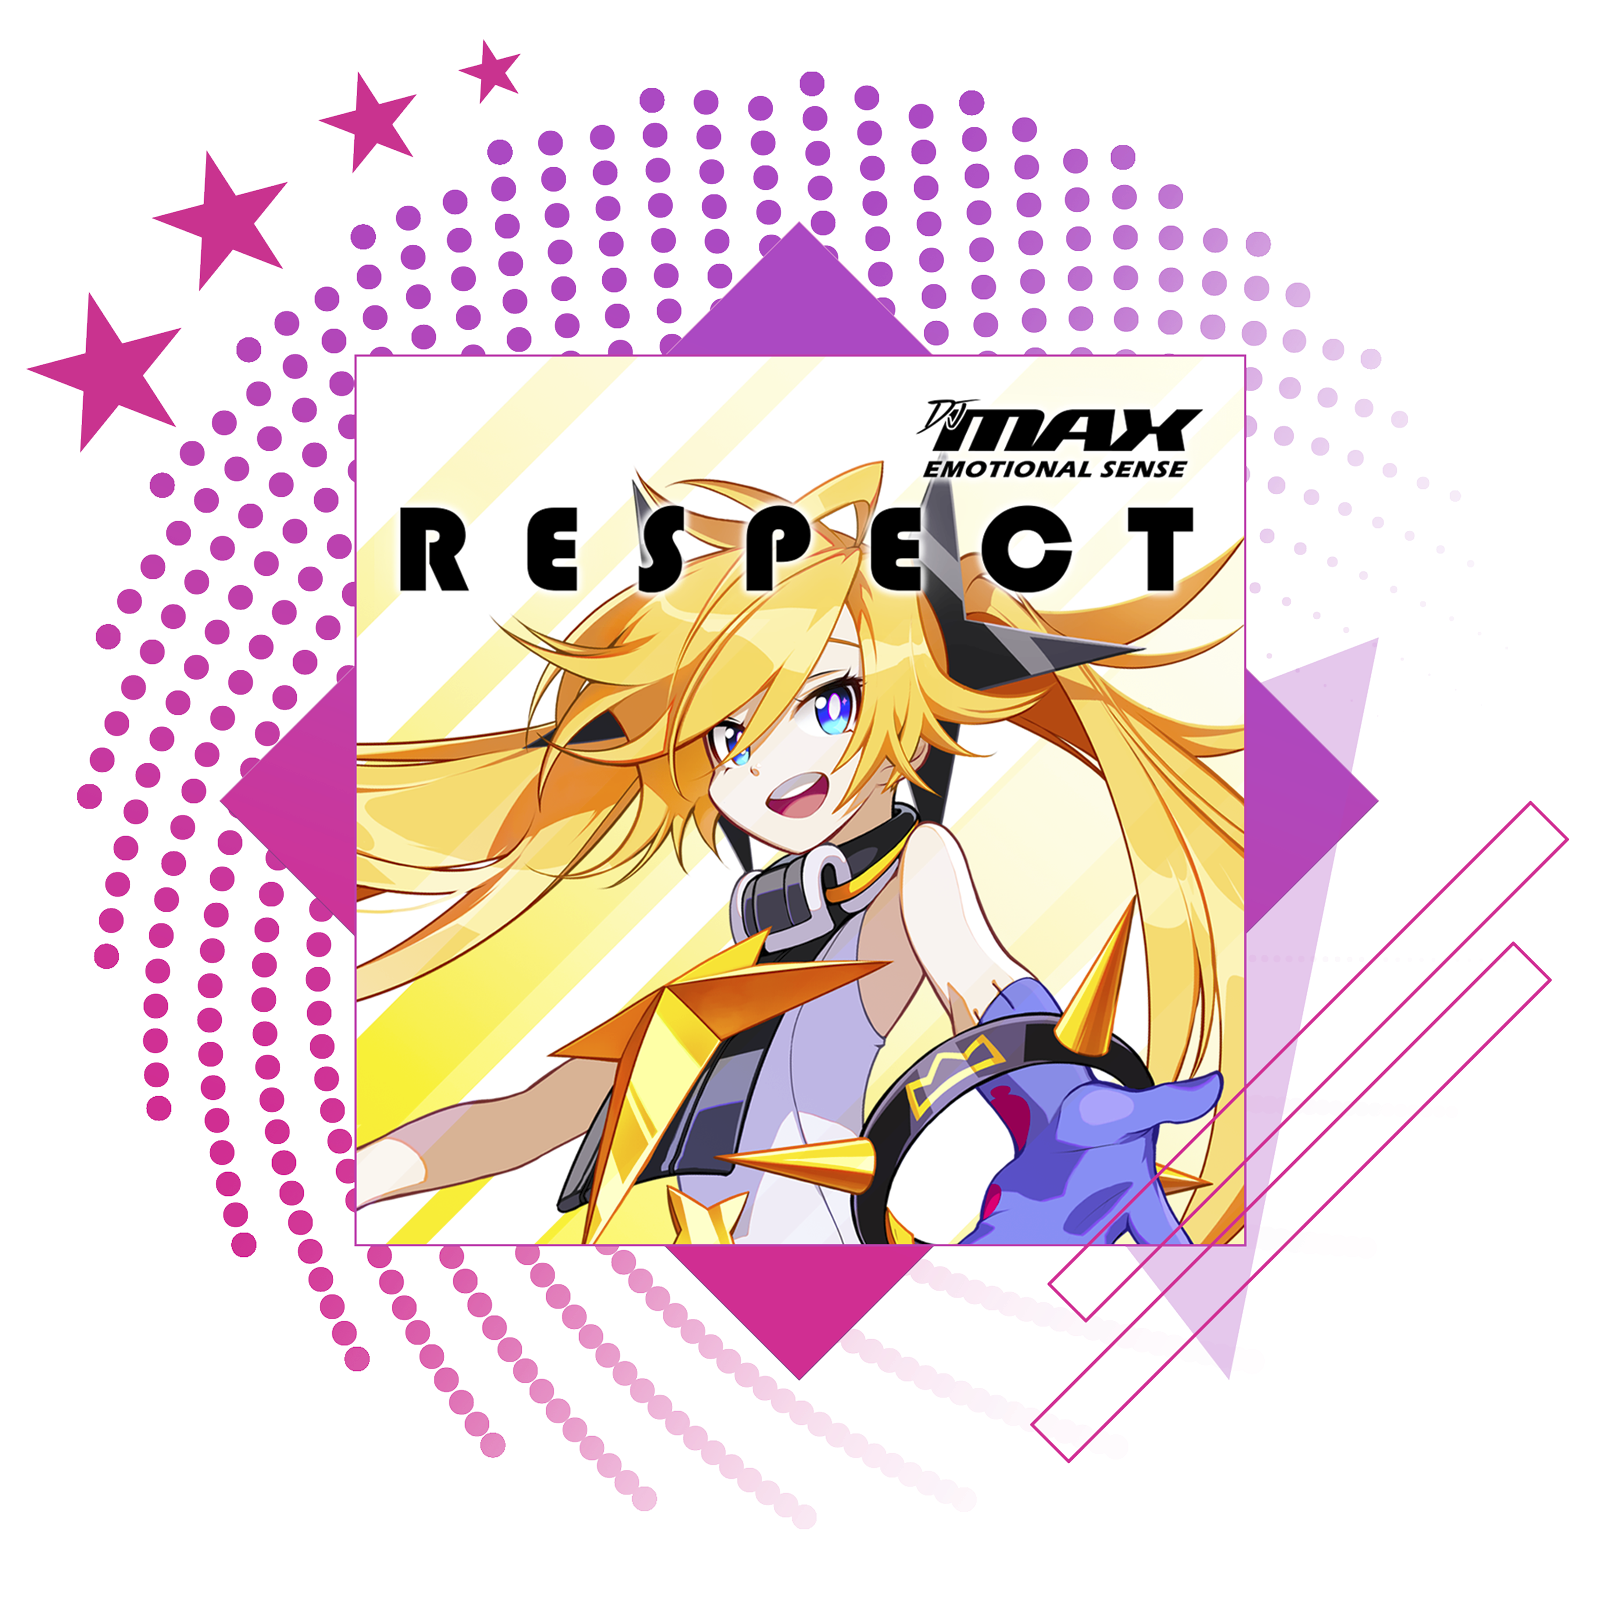 Best rhythm games feature image, featuring key art from DJMax Respect.